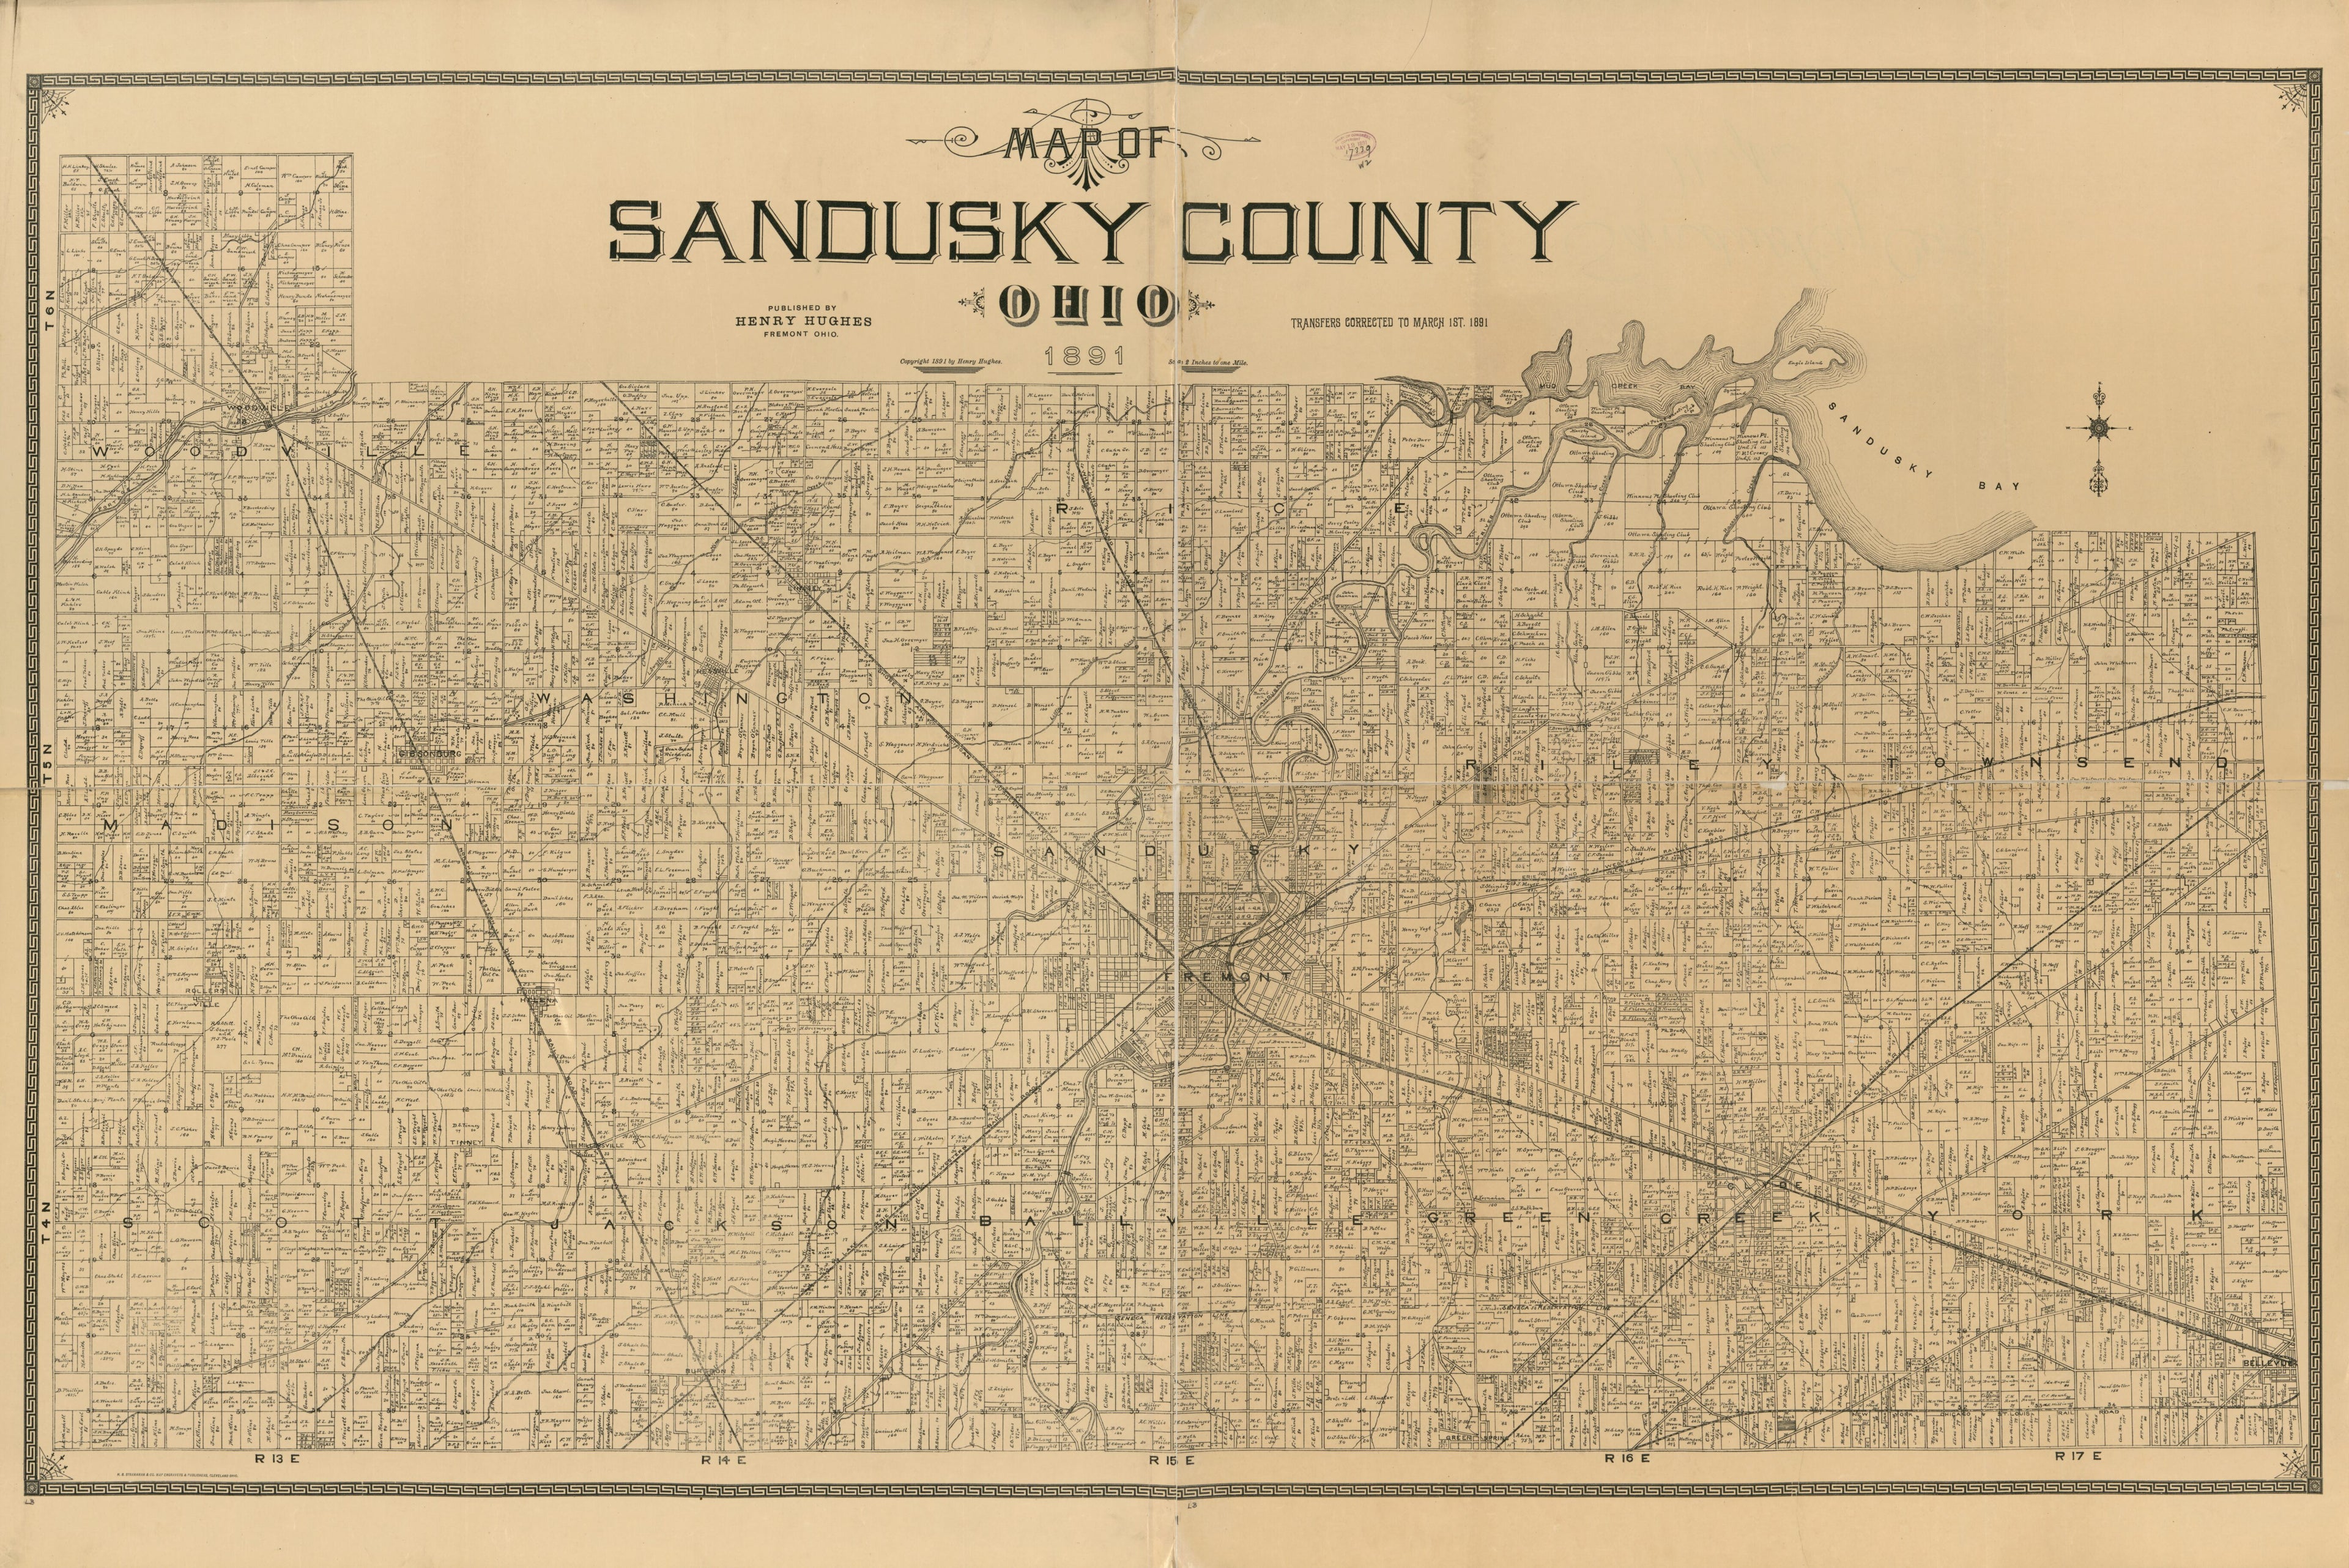 This old map of Map of Sandusky County, Ohio from 1891 was created by Henry Hughes in 1891